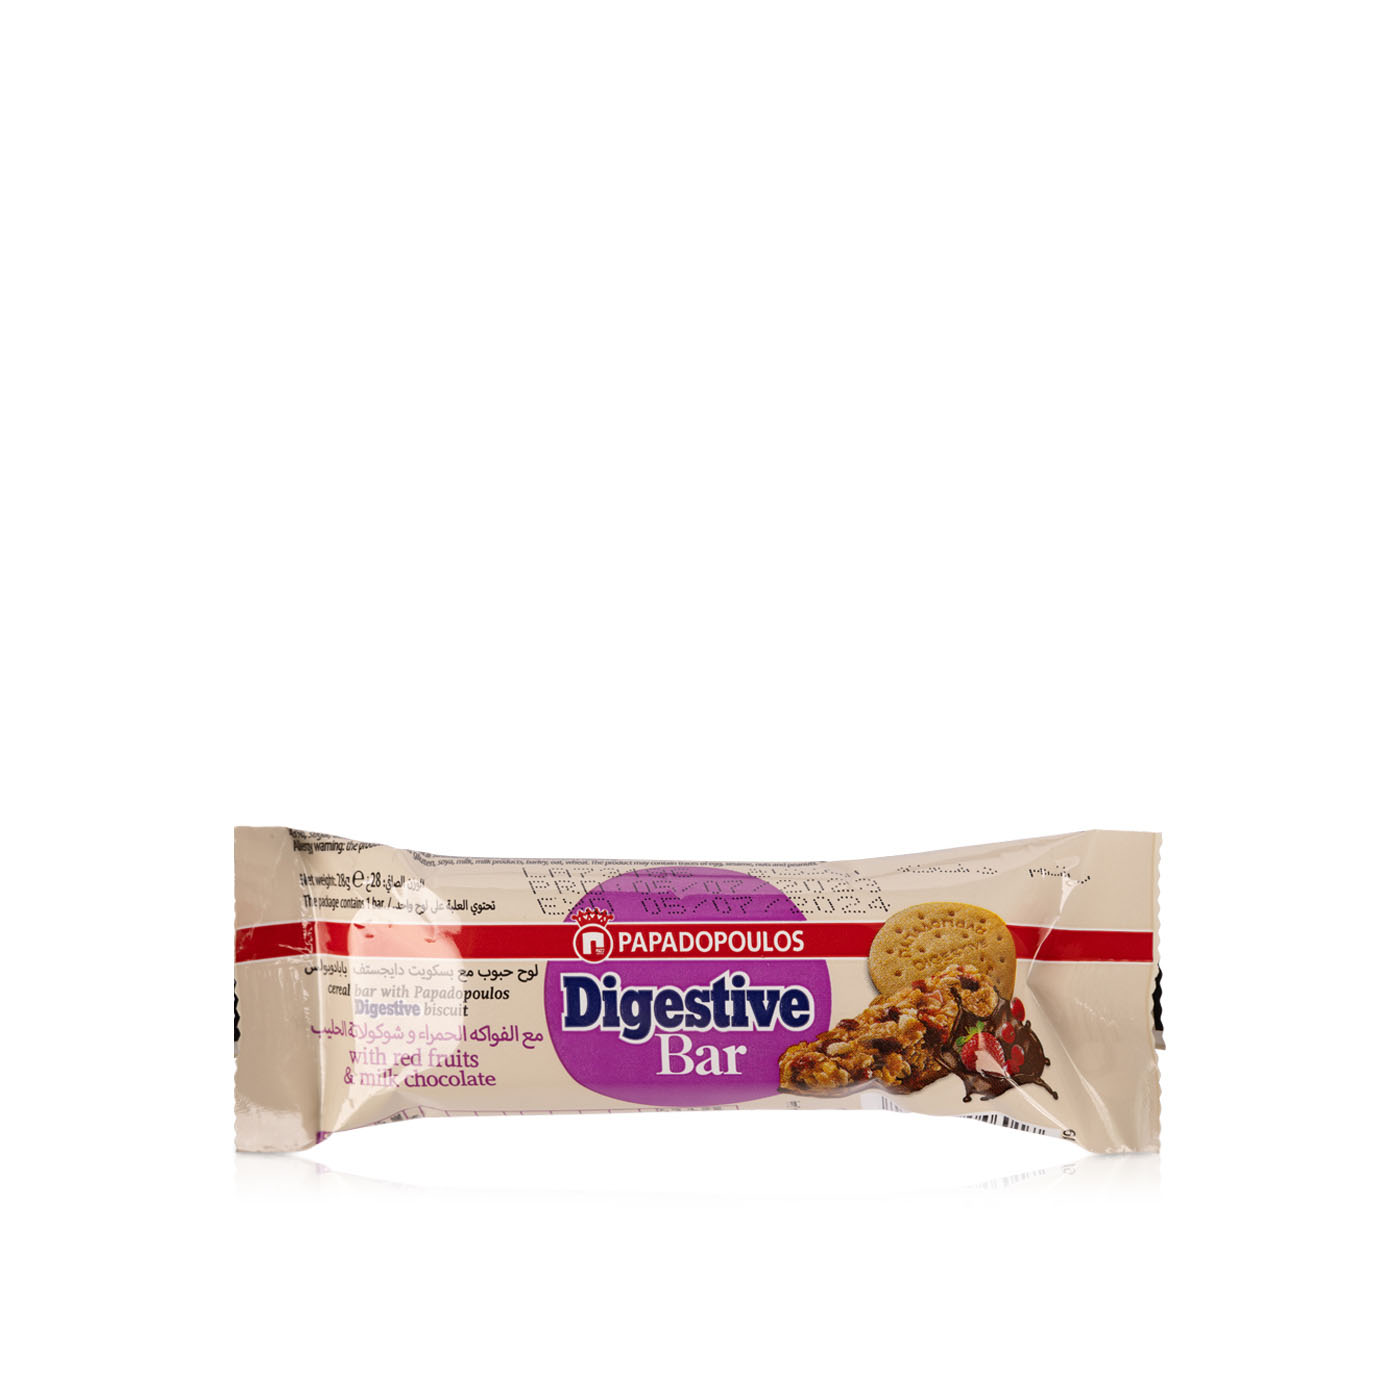 Papadopoulos Digestive Bar With Red Fruits And Milk Chocolate 28g Spinneys Uae 7142